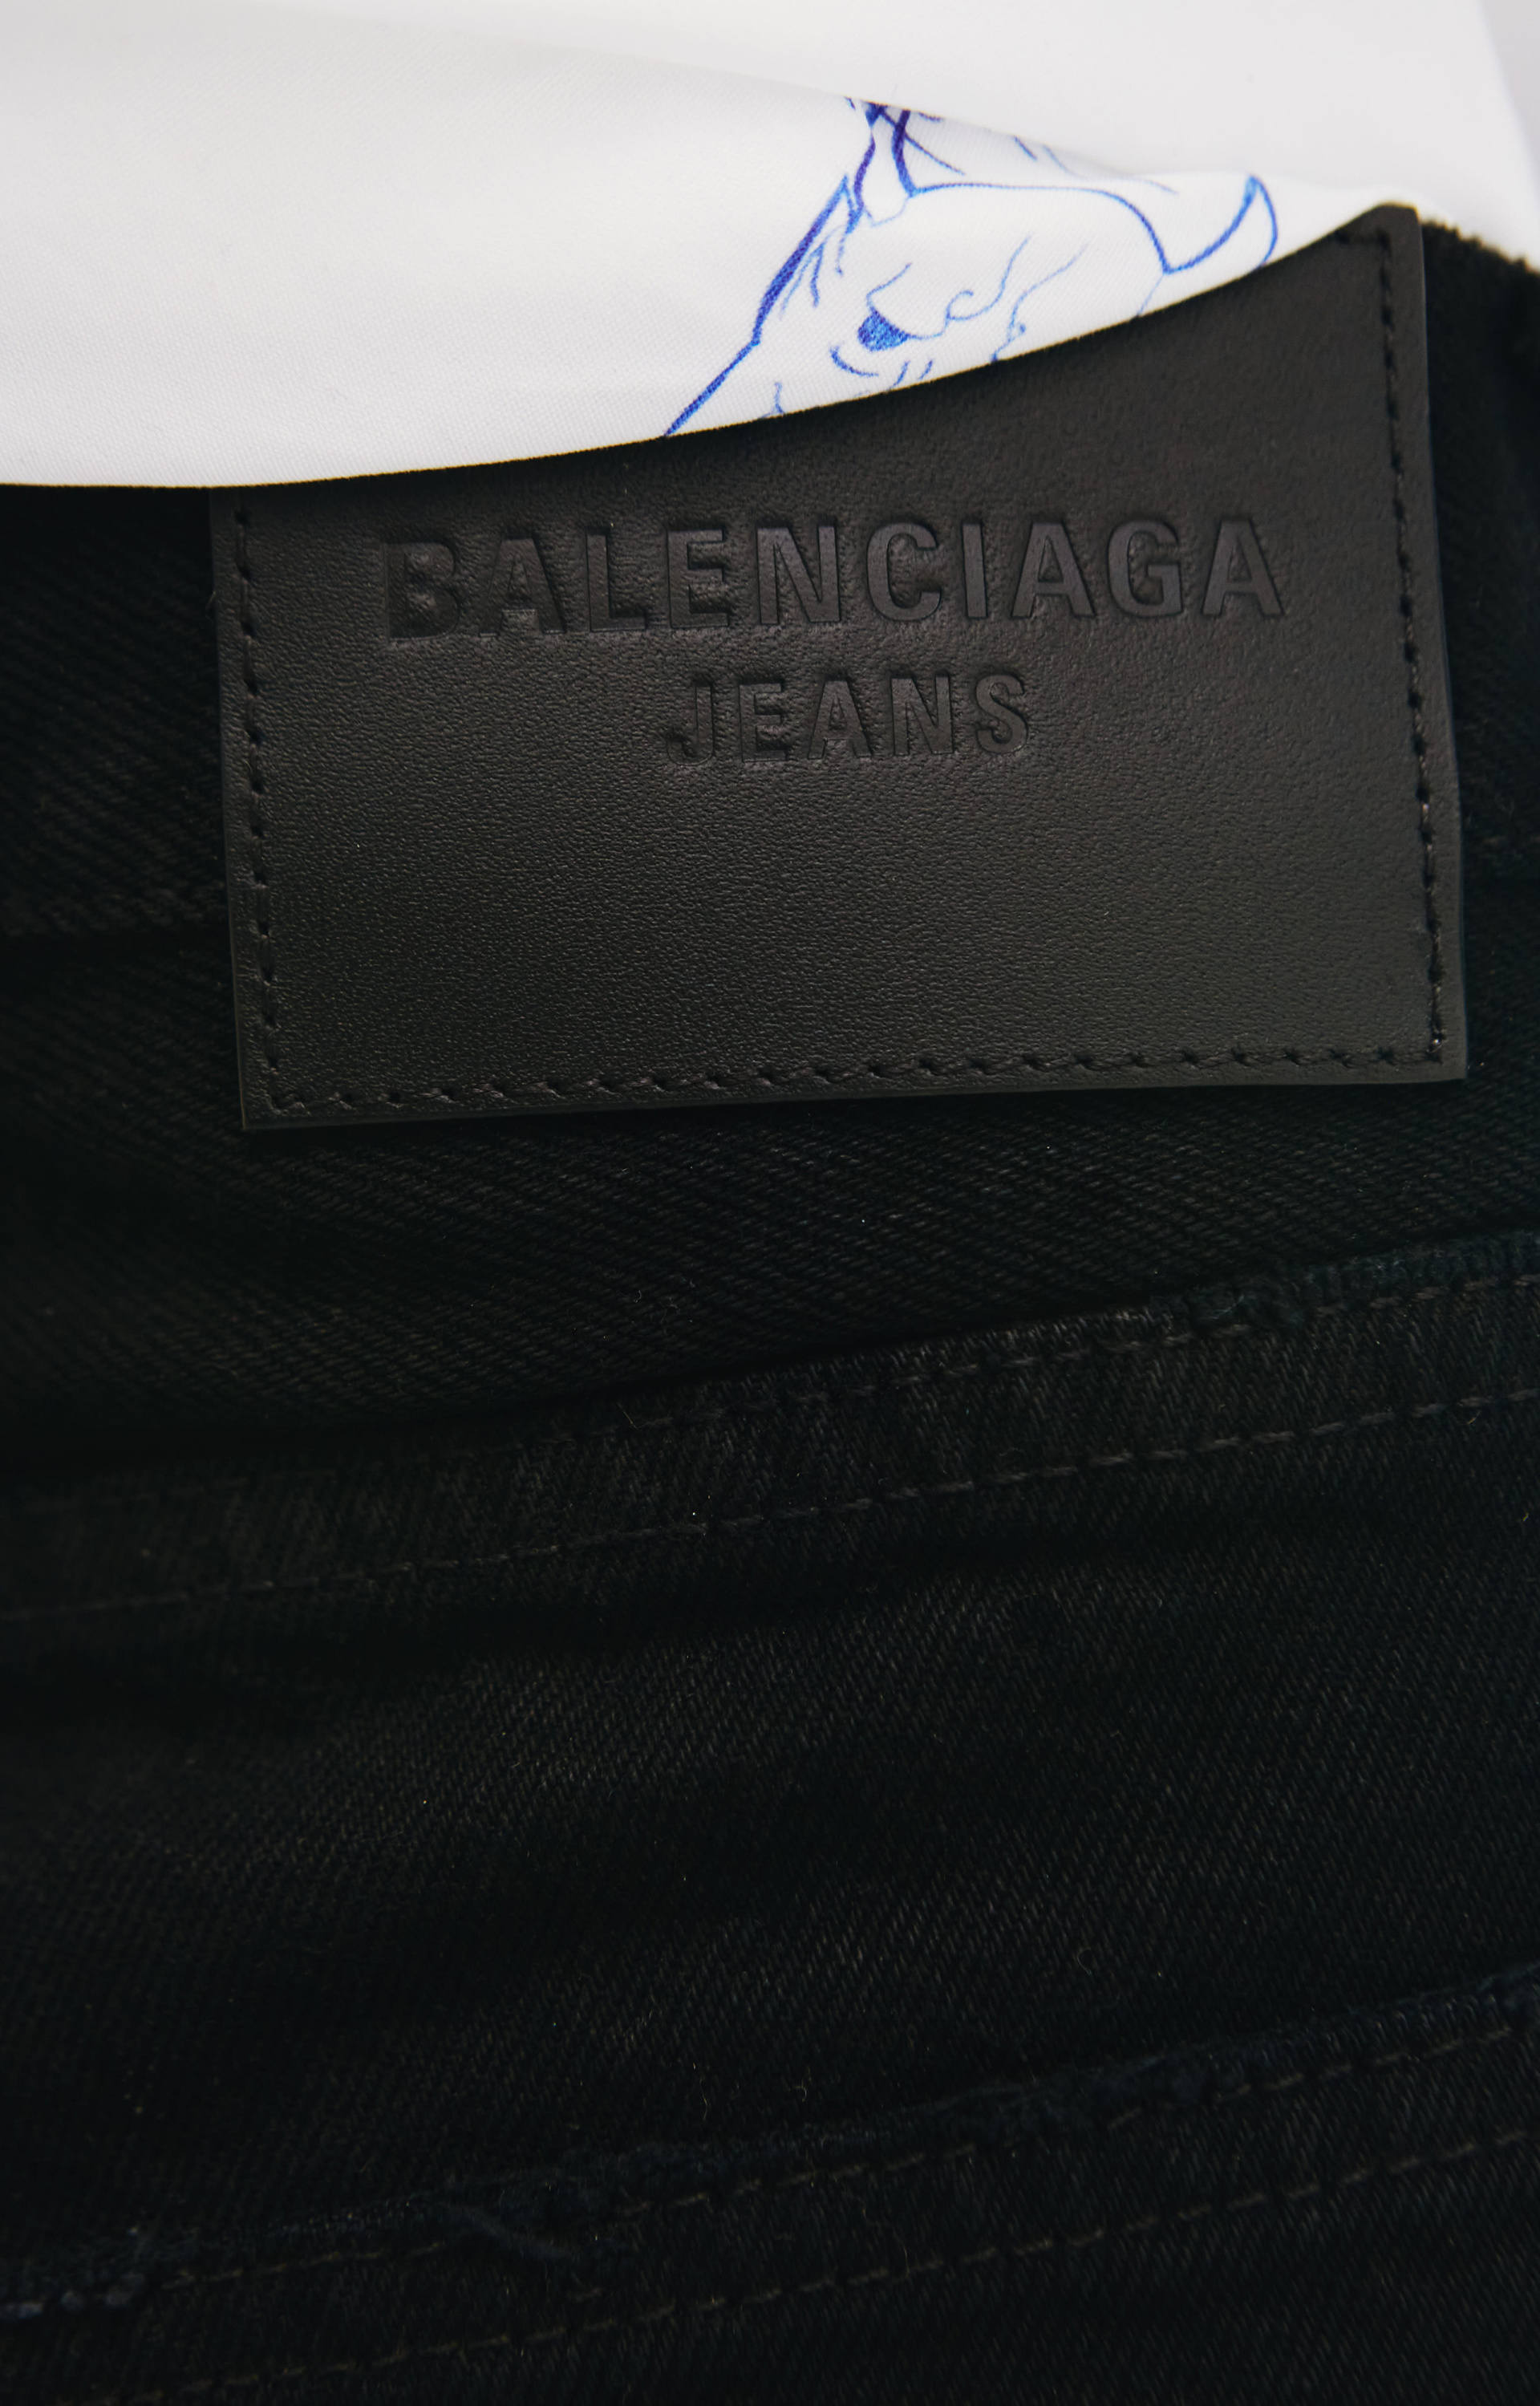 Balenciaga Normal Fit Jeans in black